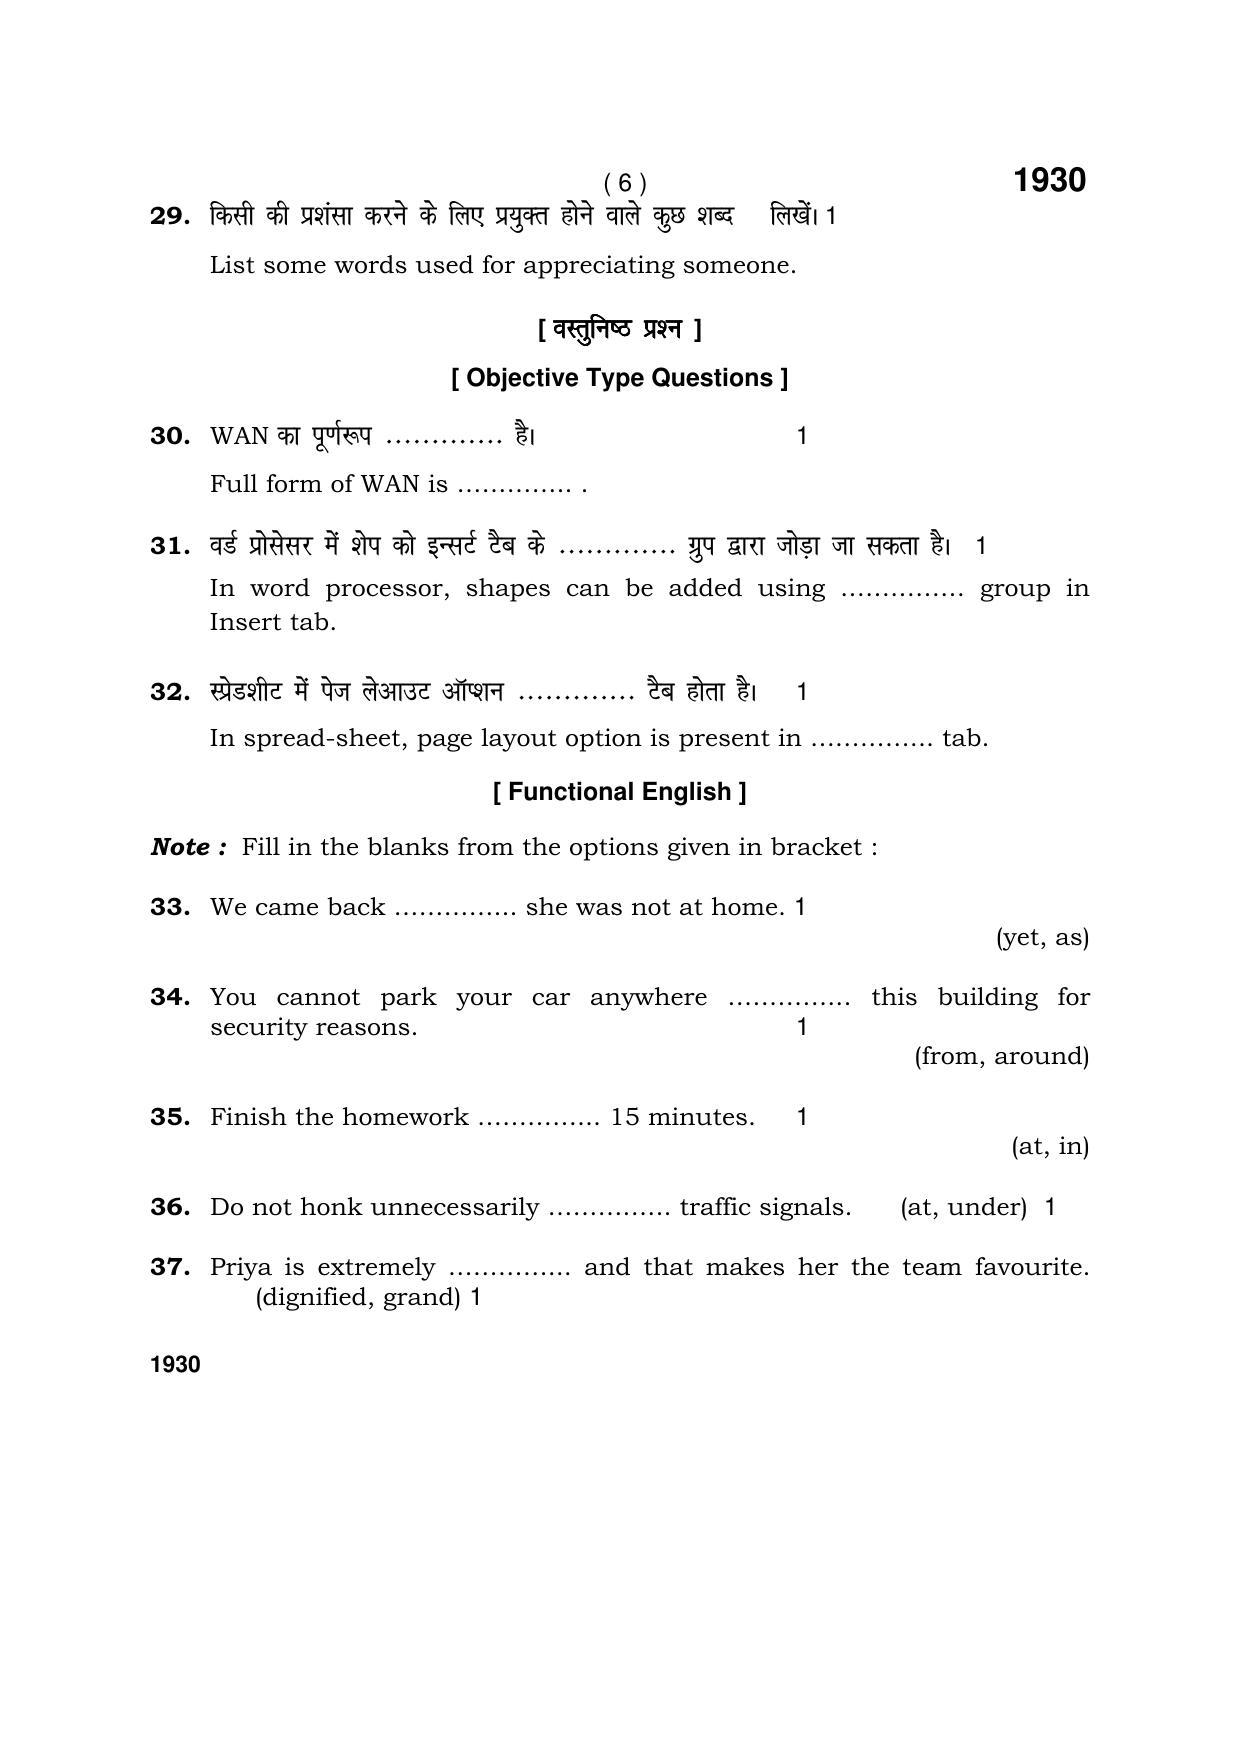 Haryana Board HBSE Class 10 IT & ITES 1930 (Level-2) 2017 Question Paper - Page 6